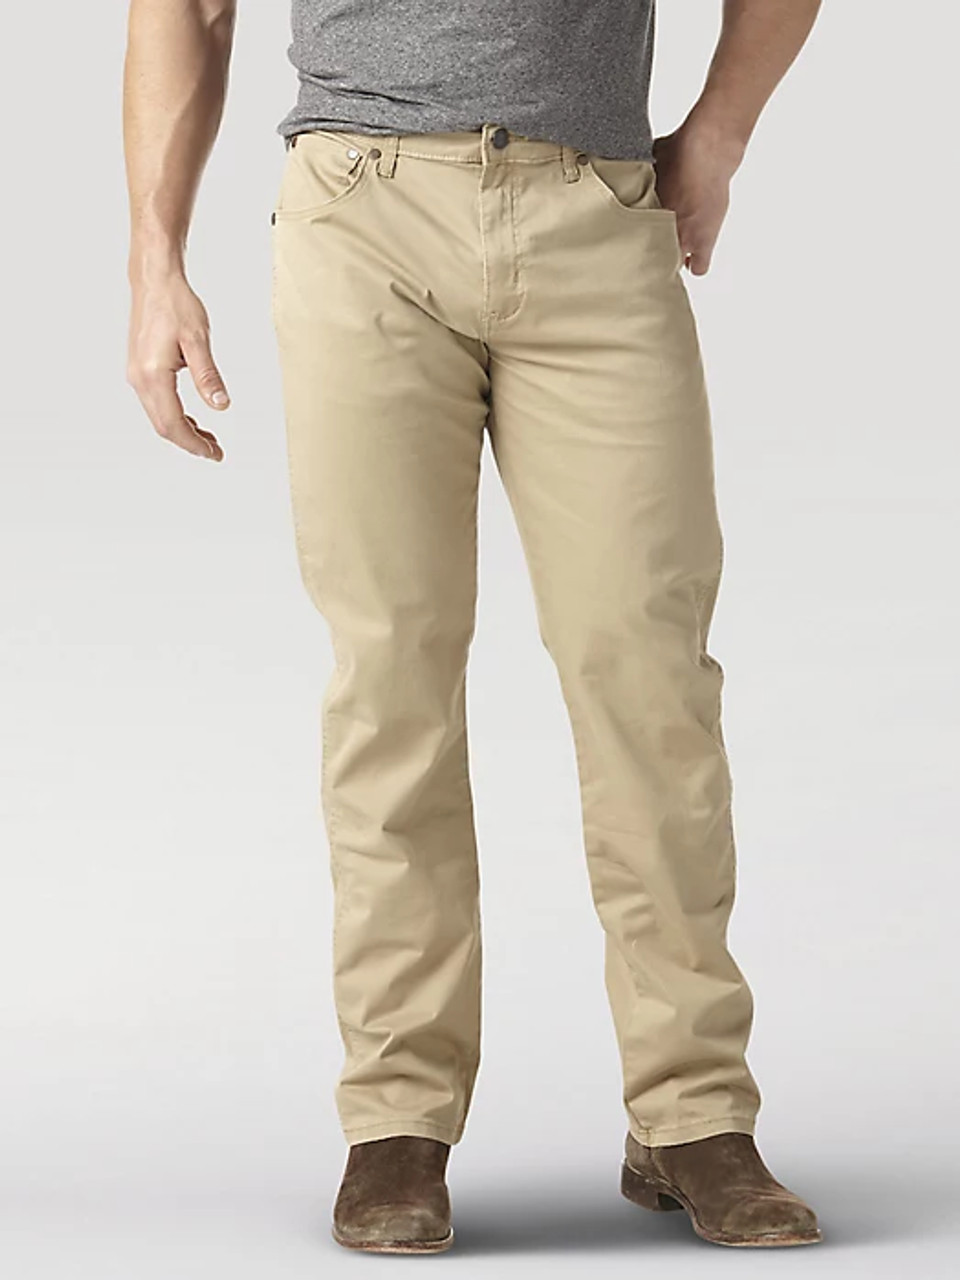 WRANGLER RETRO® SLIM FIT STRAIGHT LEG PANT IN FAWN - Wheelers Outfitters